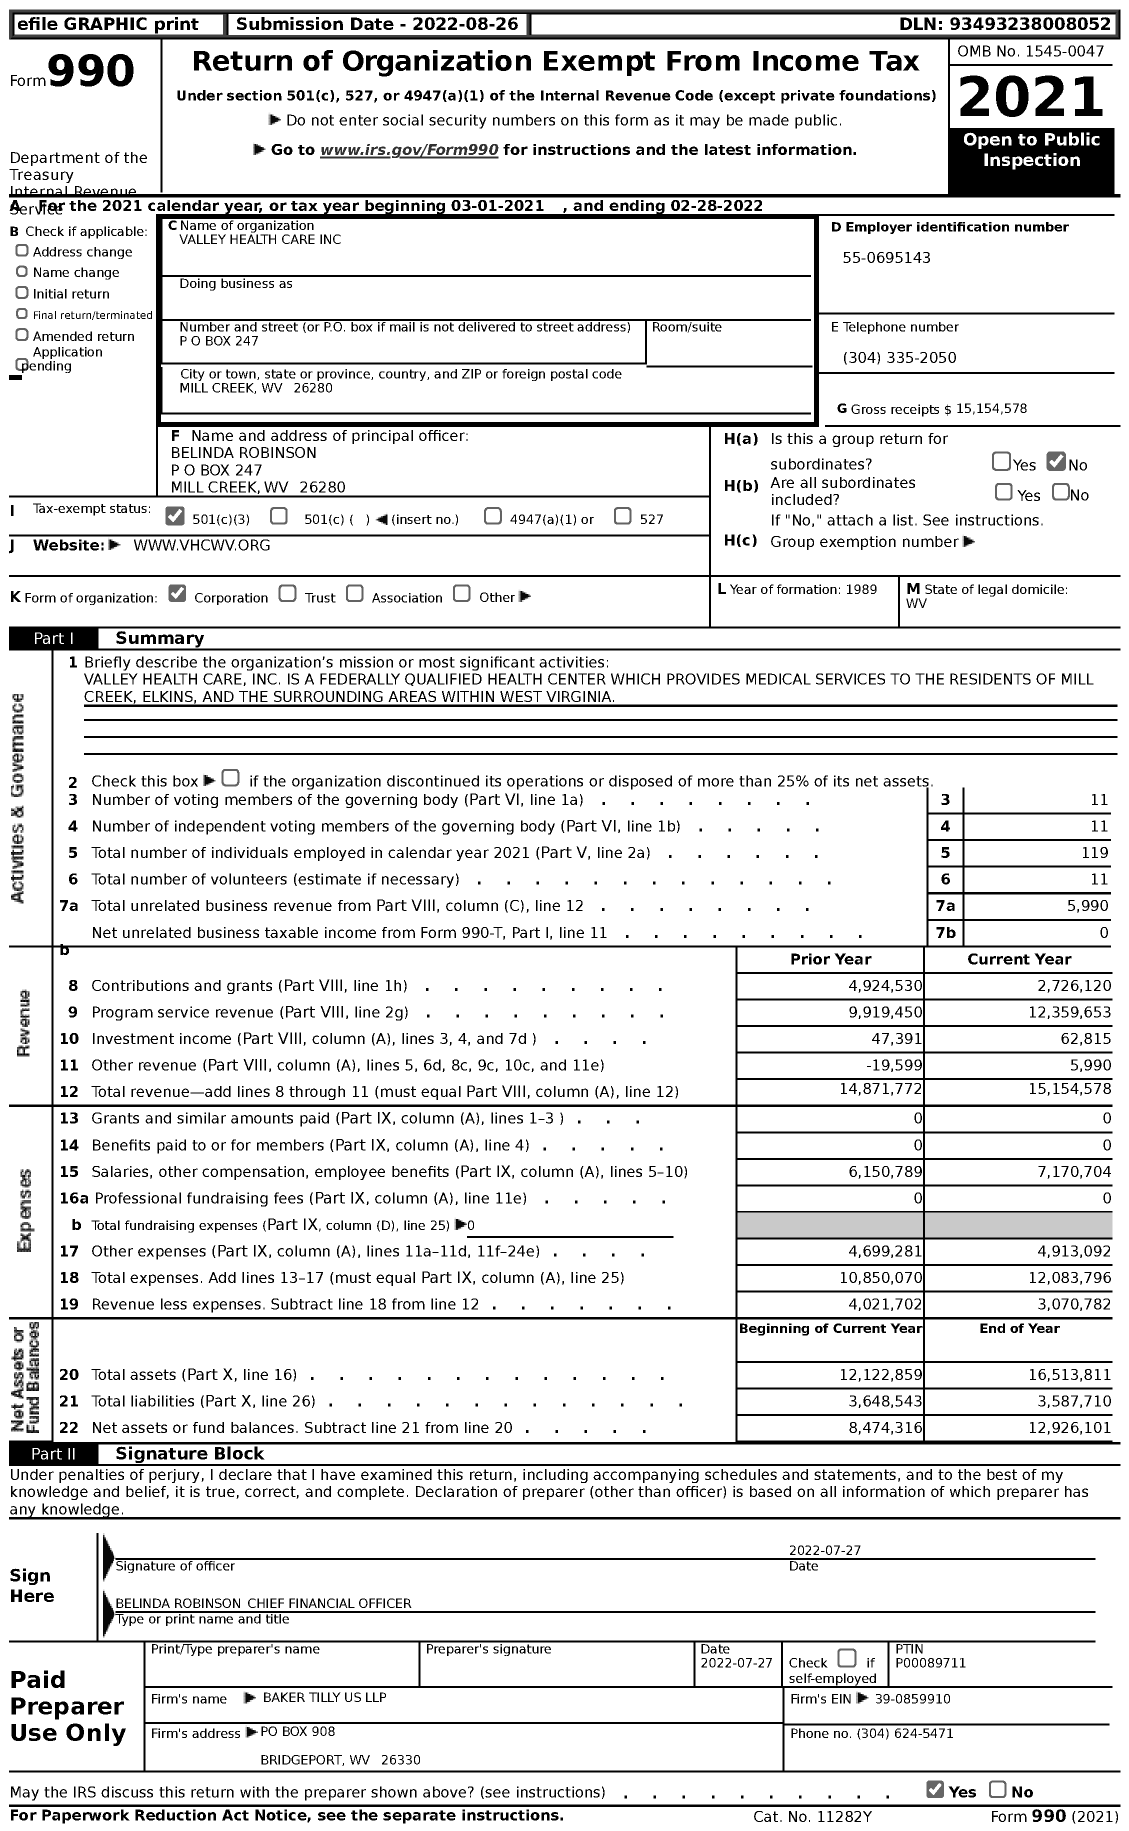 Image of first page of 2021 Form 990 for Valley Health Care (VHC)